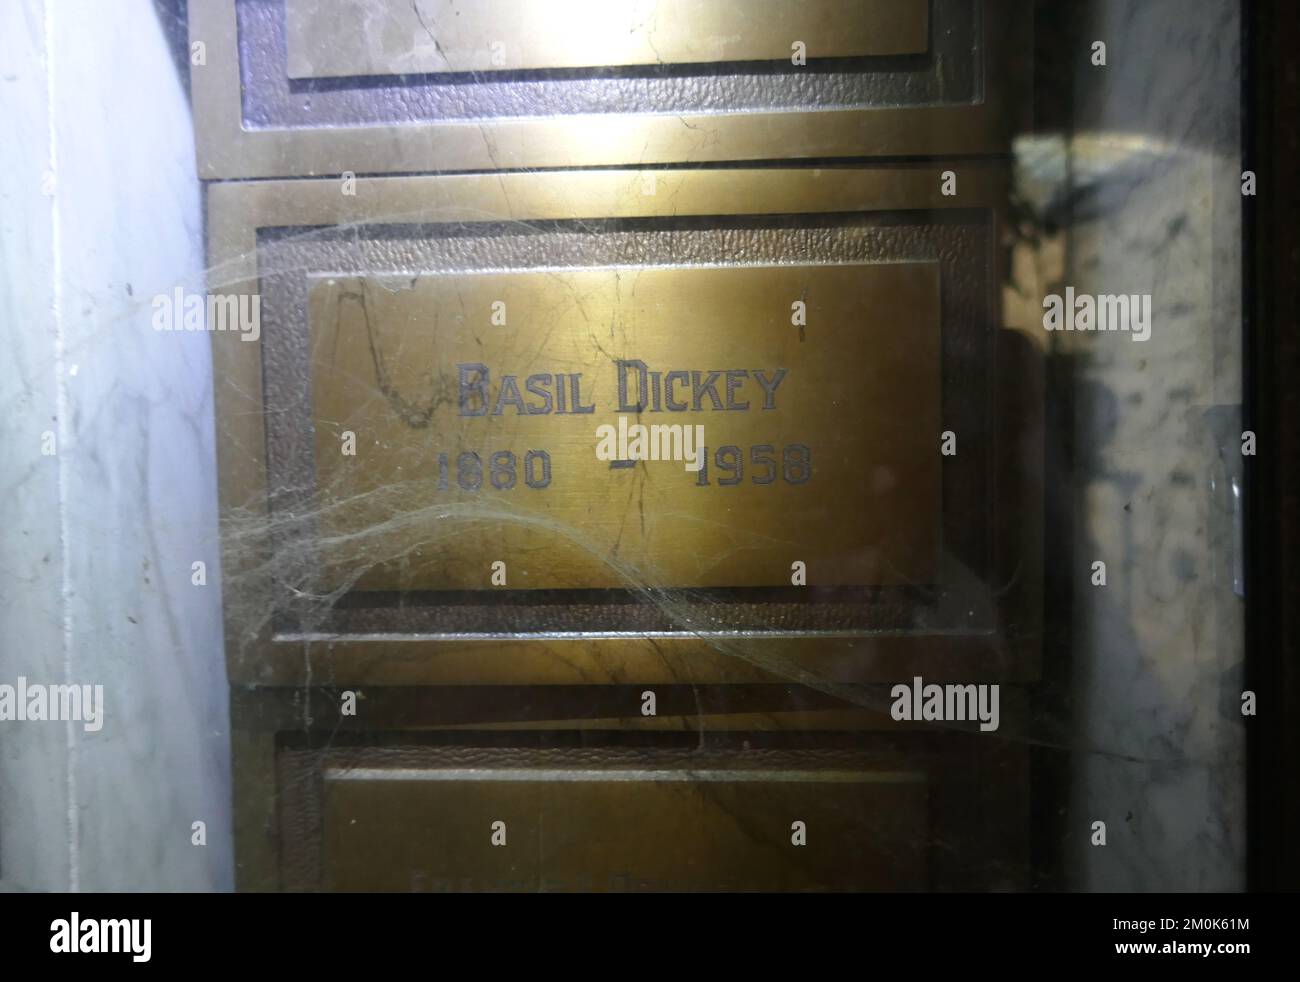 Los Angeles, California, USA 3rd December 2022 Screenwriter Basil Dickey's Grave/urn in Abby of the Psalms at Hollywood Forever Cemetery on December 3, 2022 in Los Angeles, California, USA. Photo by Barry King/Alamy Stock Photo Stock Photo